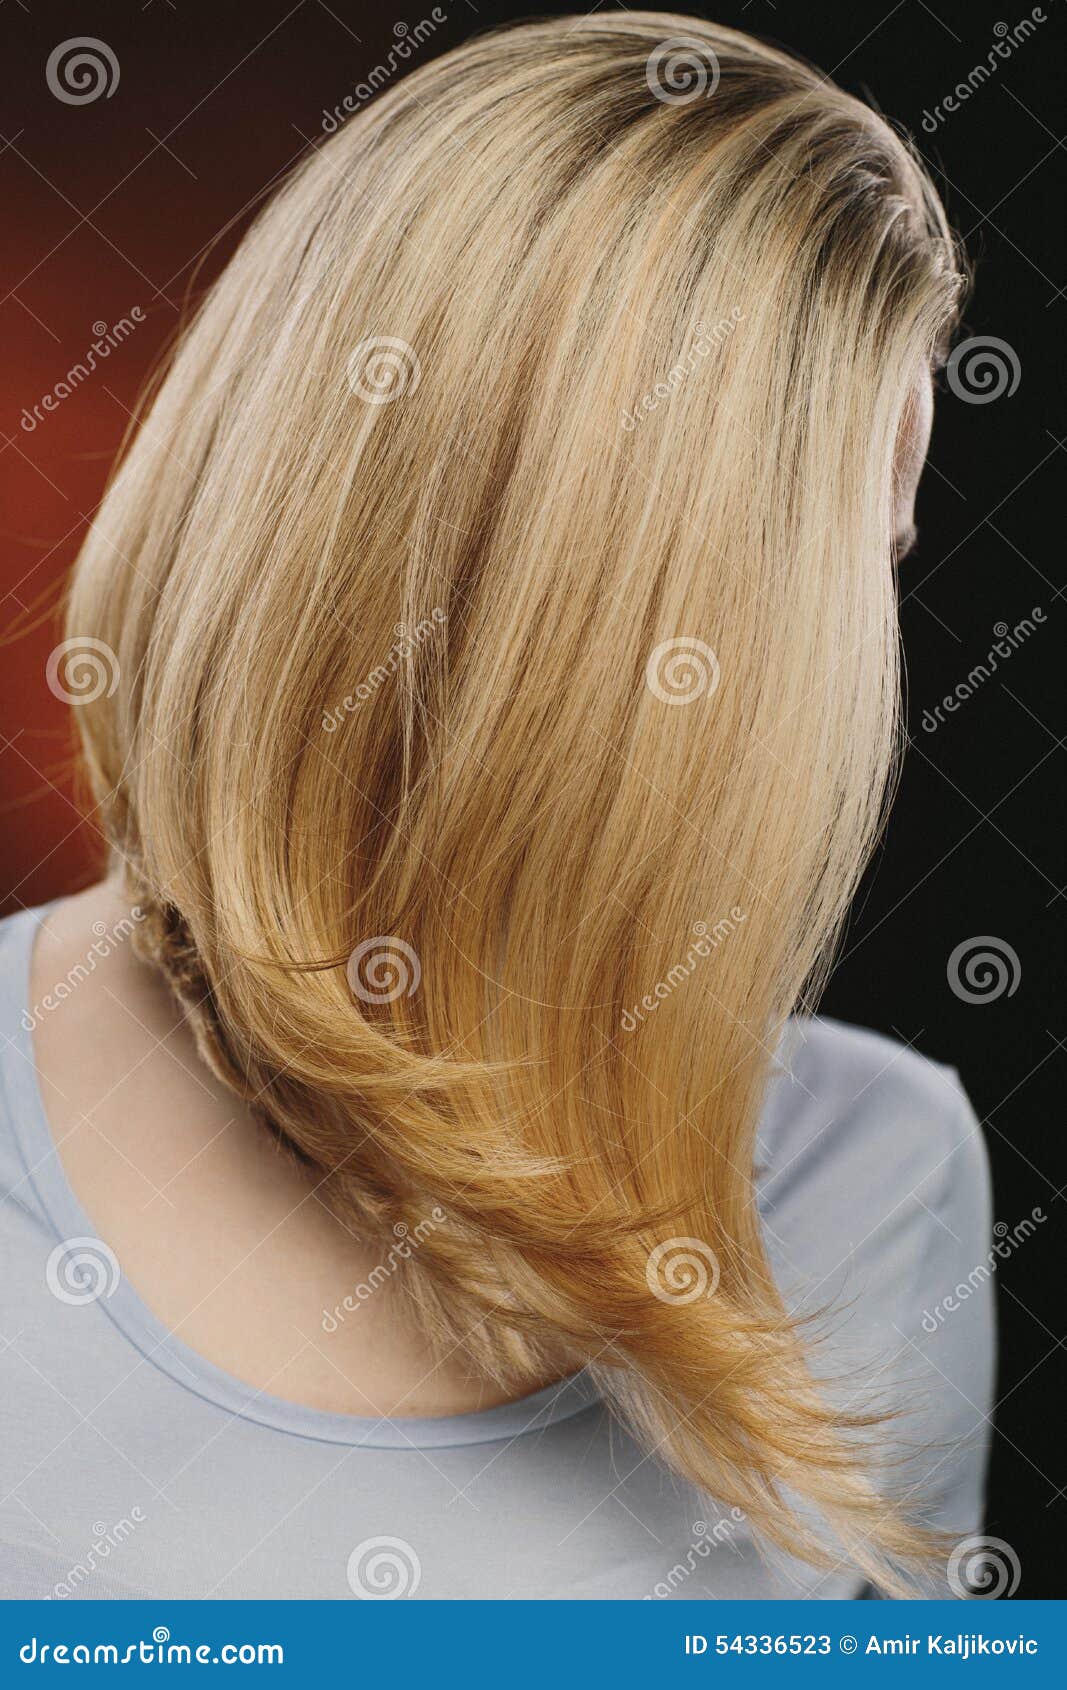 Woman Covering Her Face with Her Blond Hair Stock Image - Image of shiny,  mystique: 54336523